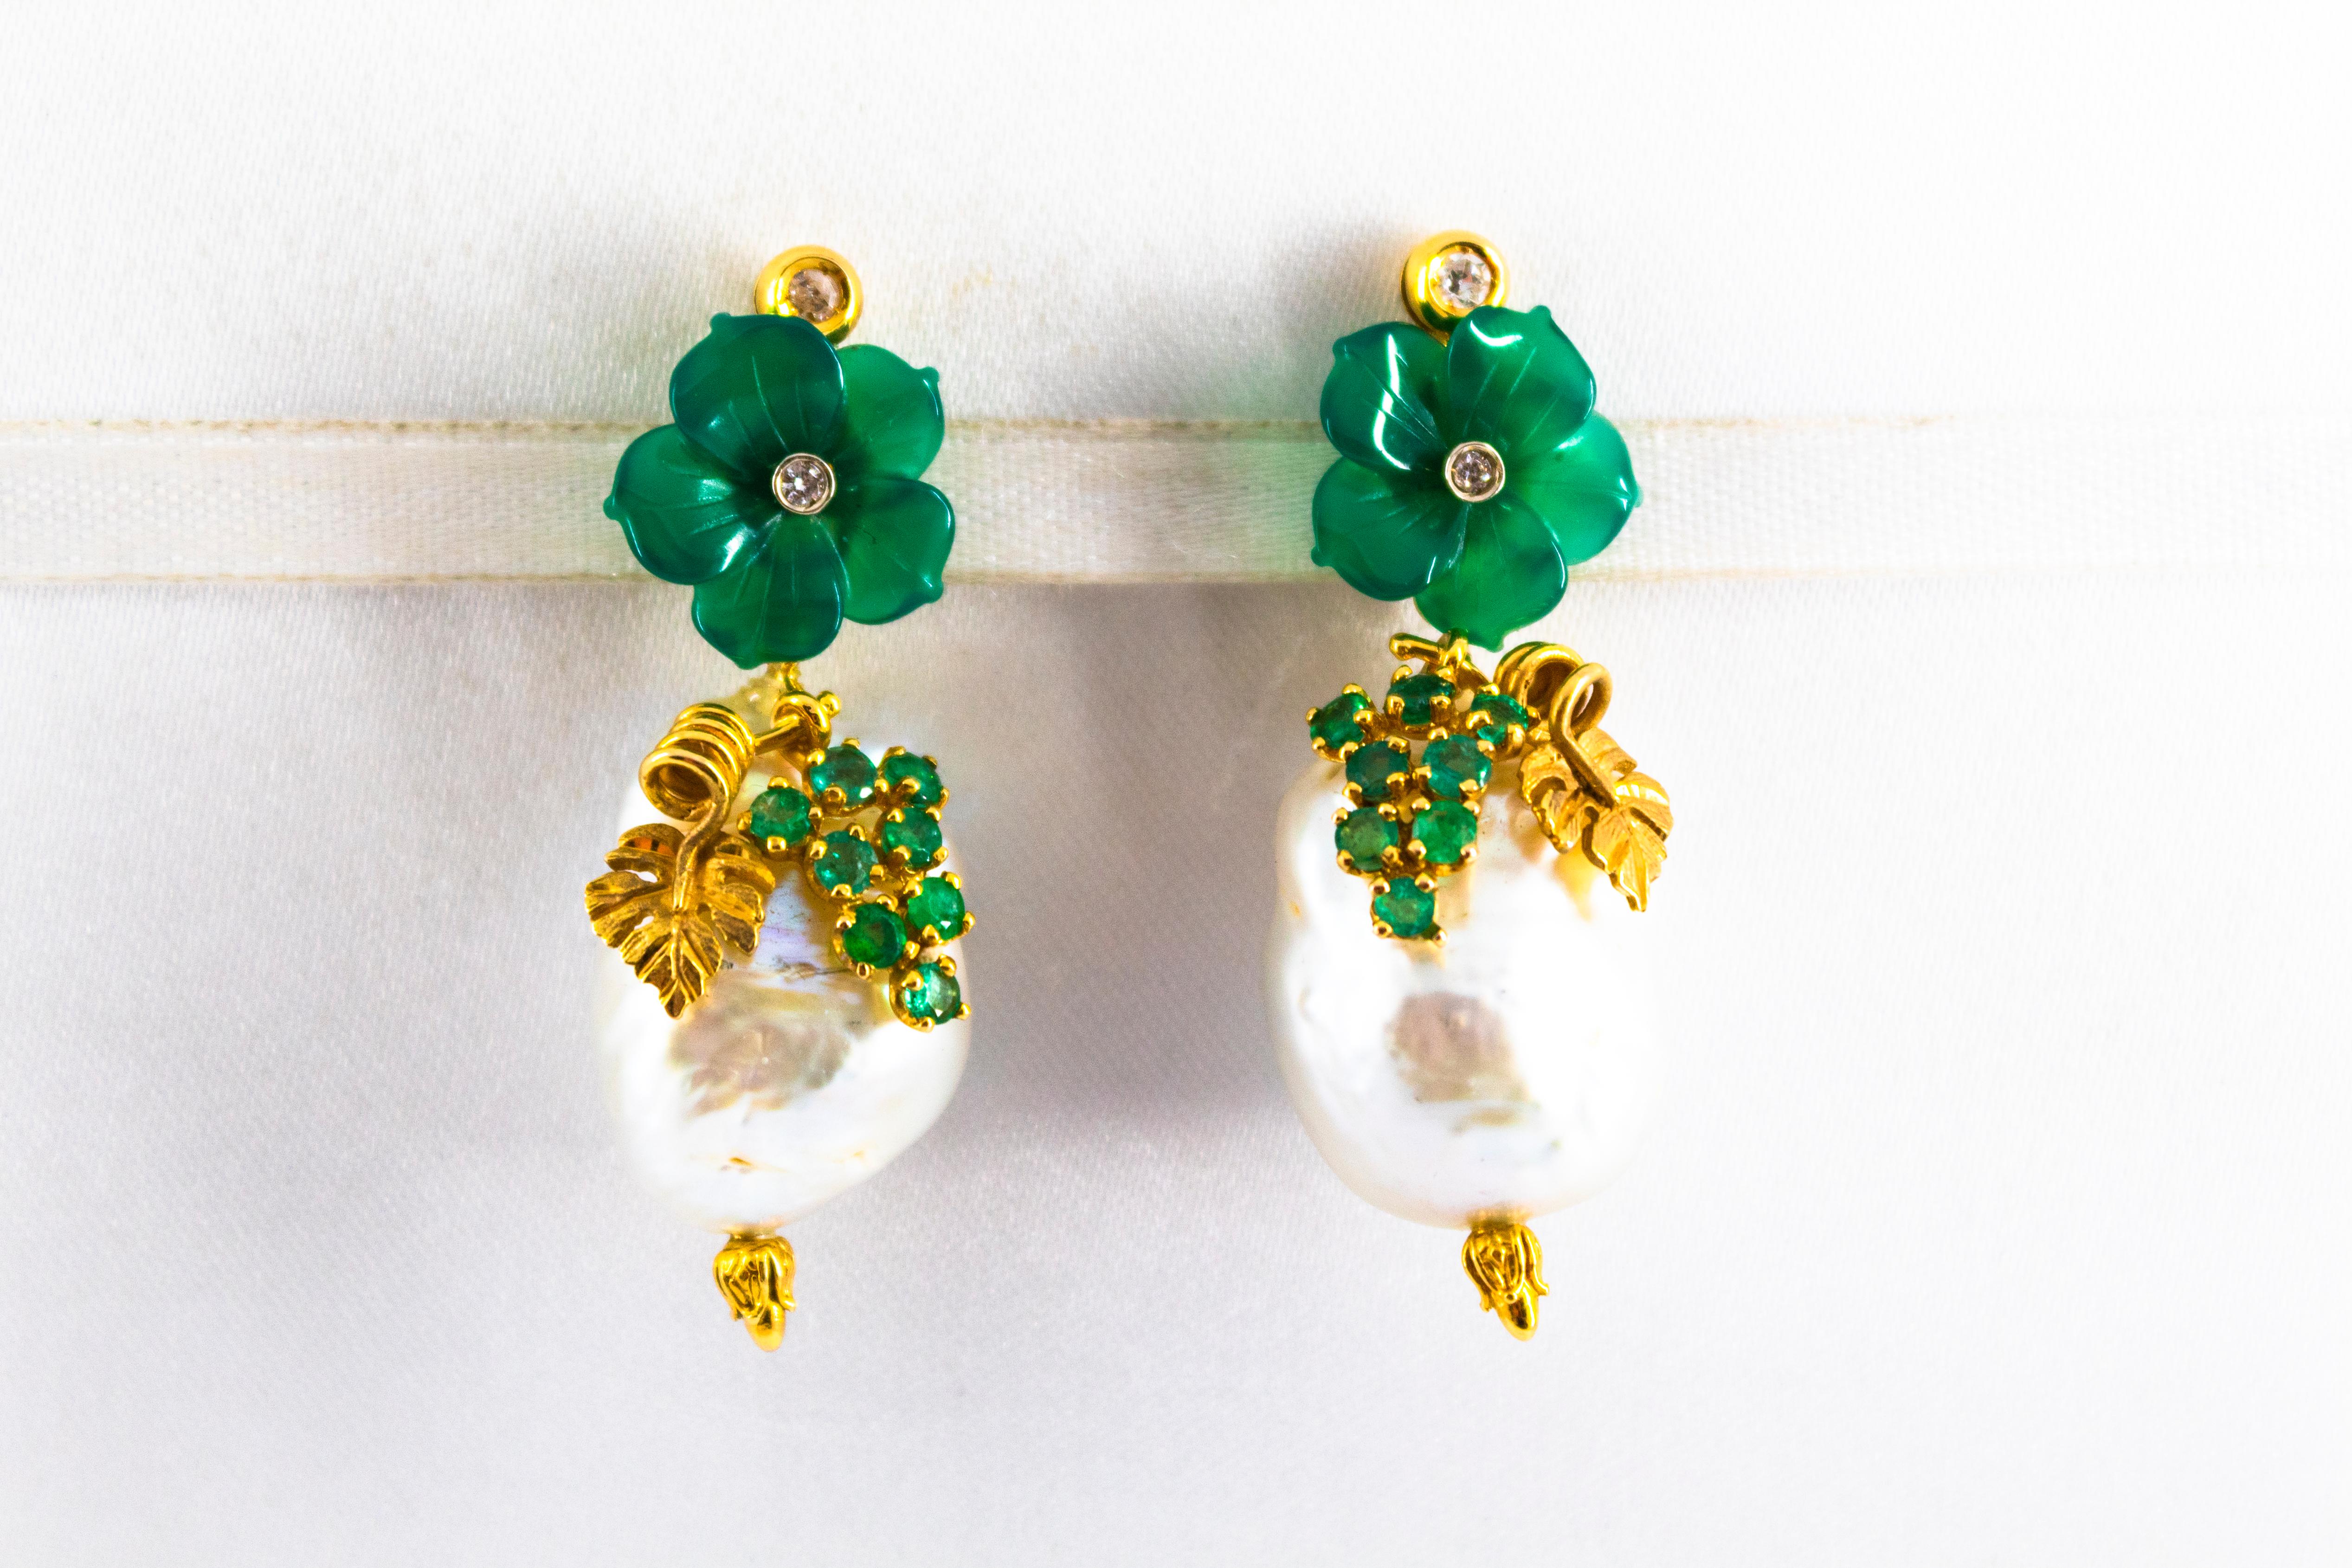 These Stud Earrings are made of 14K Yellow Gold.
These Earrings have 0.12 Carats of White Diamonds.
These Earrings have 0.90 Carats of Emeralds.
These Earrings have also Freshwater Pearls and Agate.
These Earrings are available also with Purple